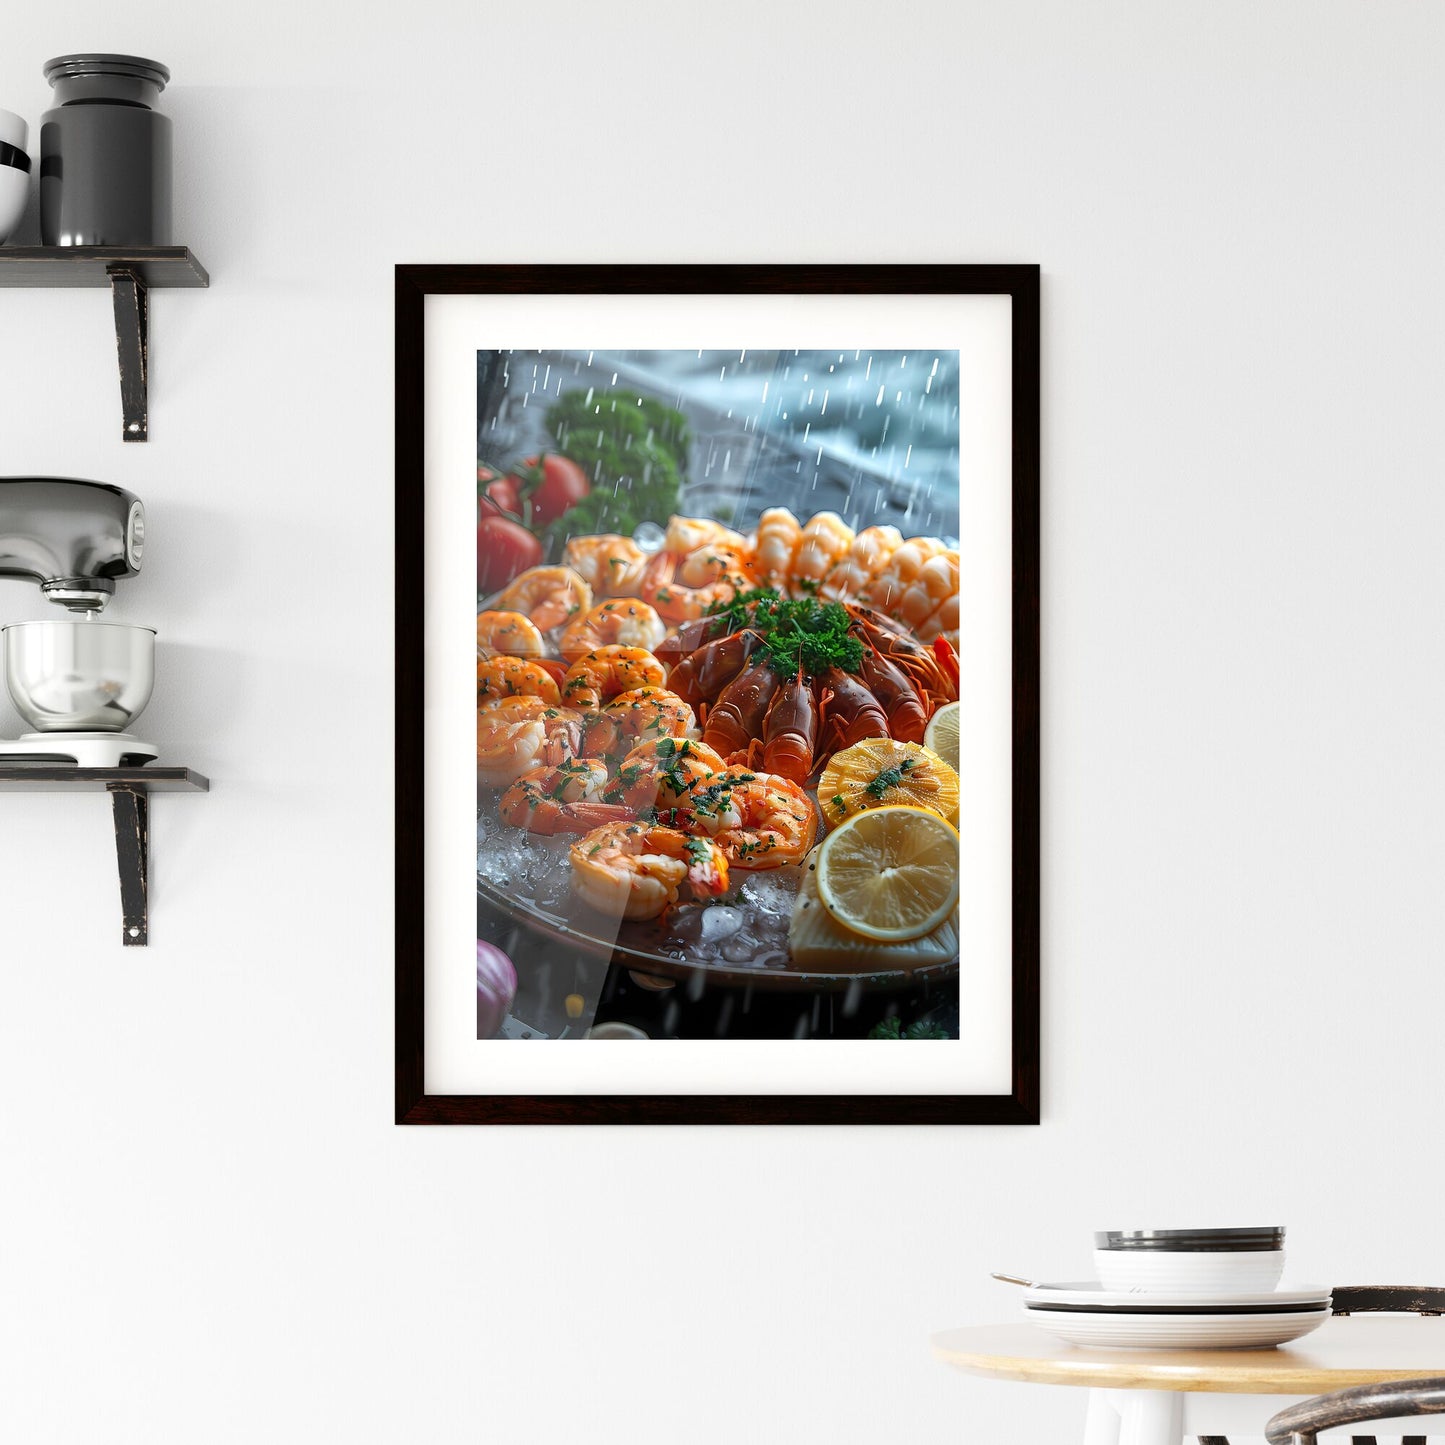 Dramatic Depiction of Seafood Feast: Plate of Sea Delicacies Adorned with Lemons and Tomatoes Against a Vibrant Oceanic Backdrop Default Title